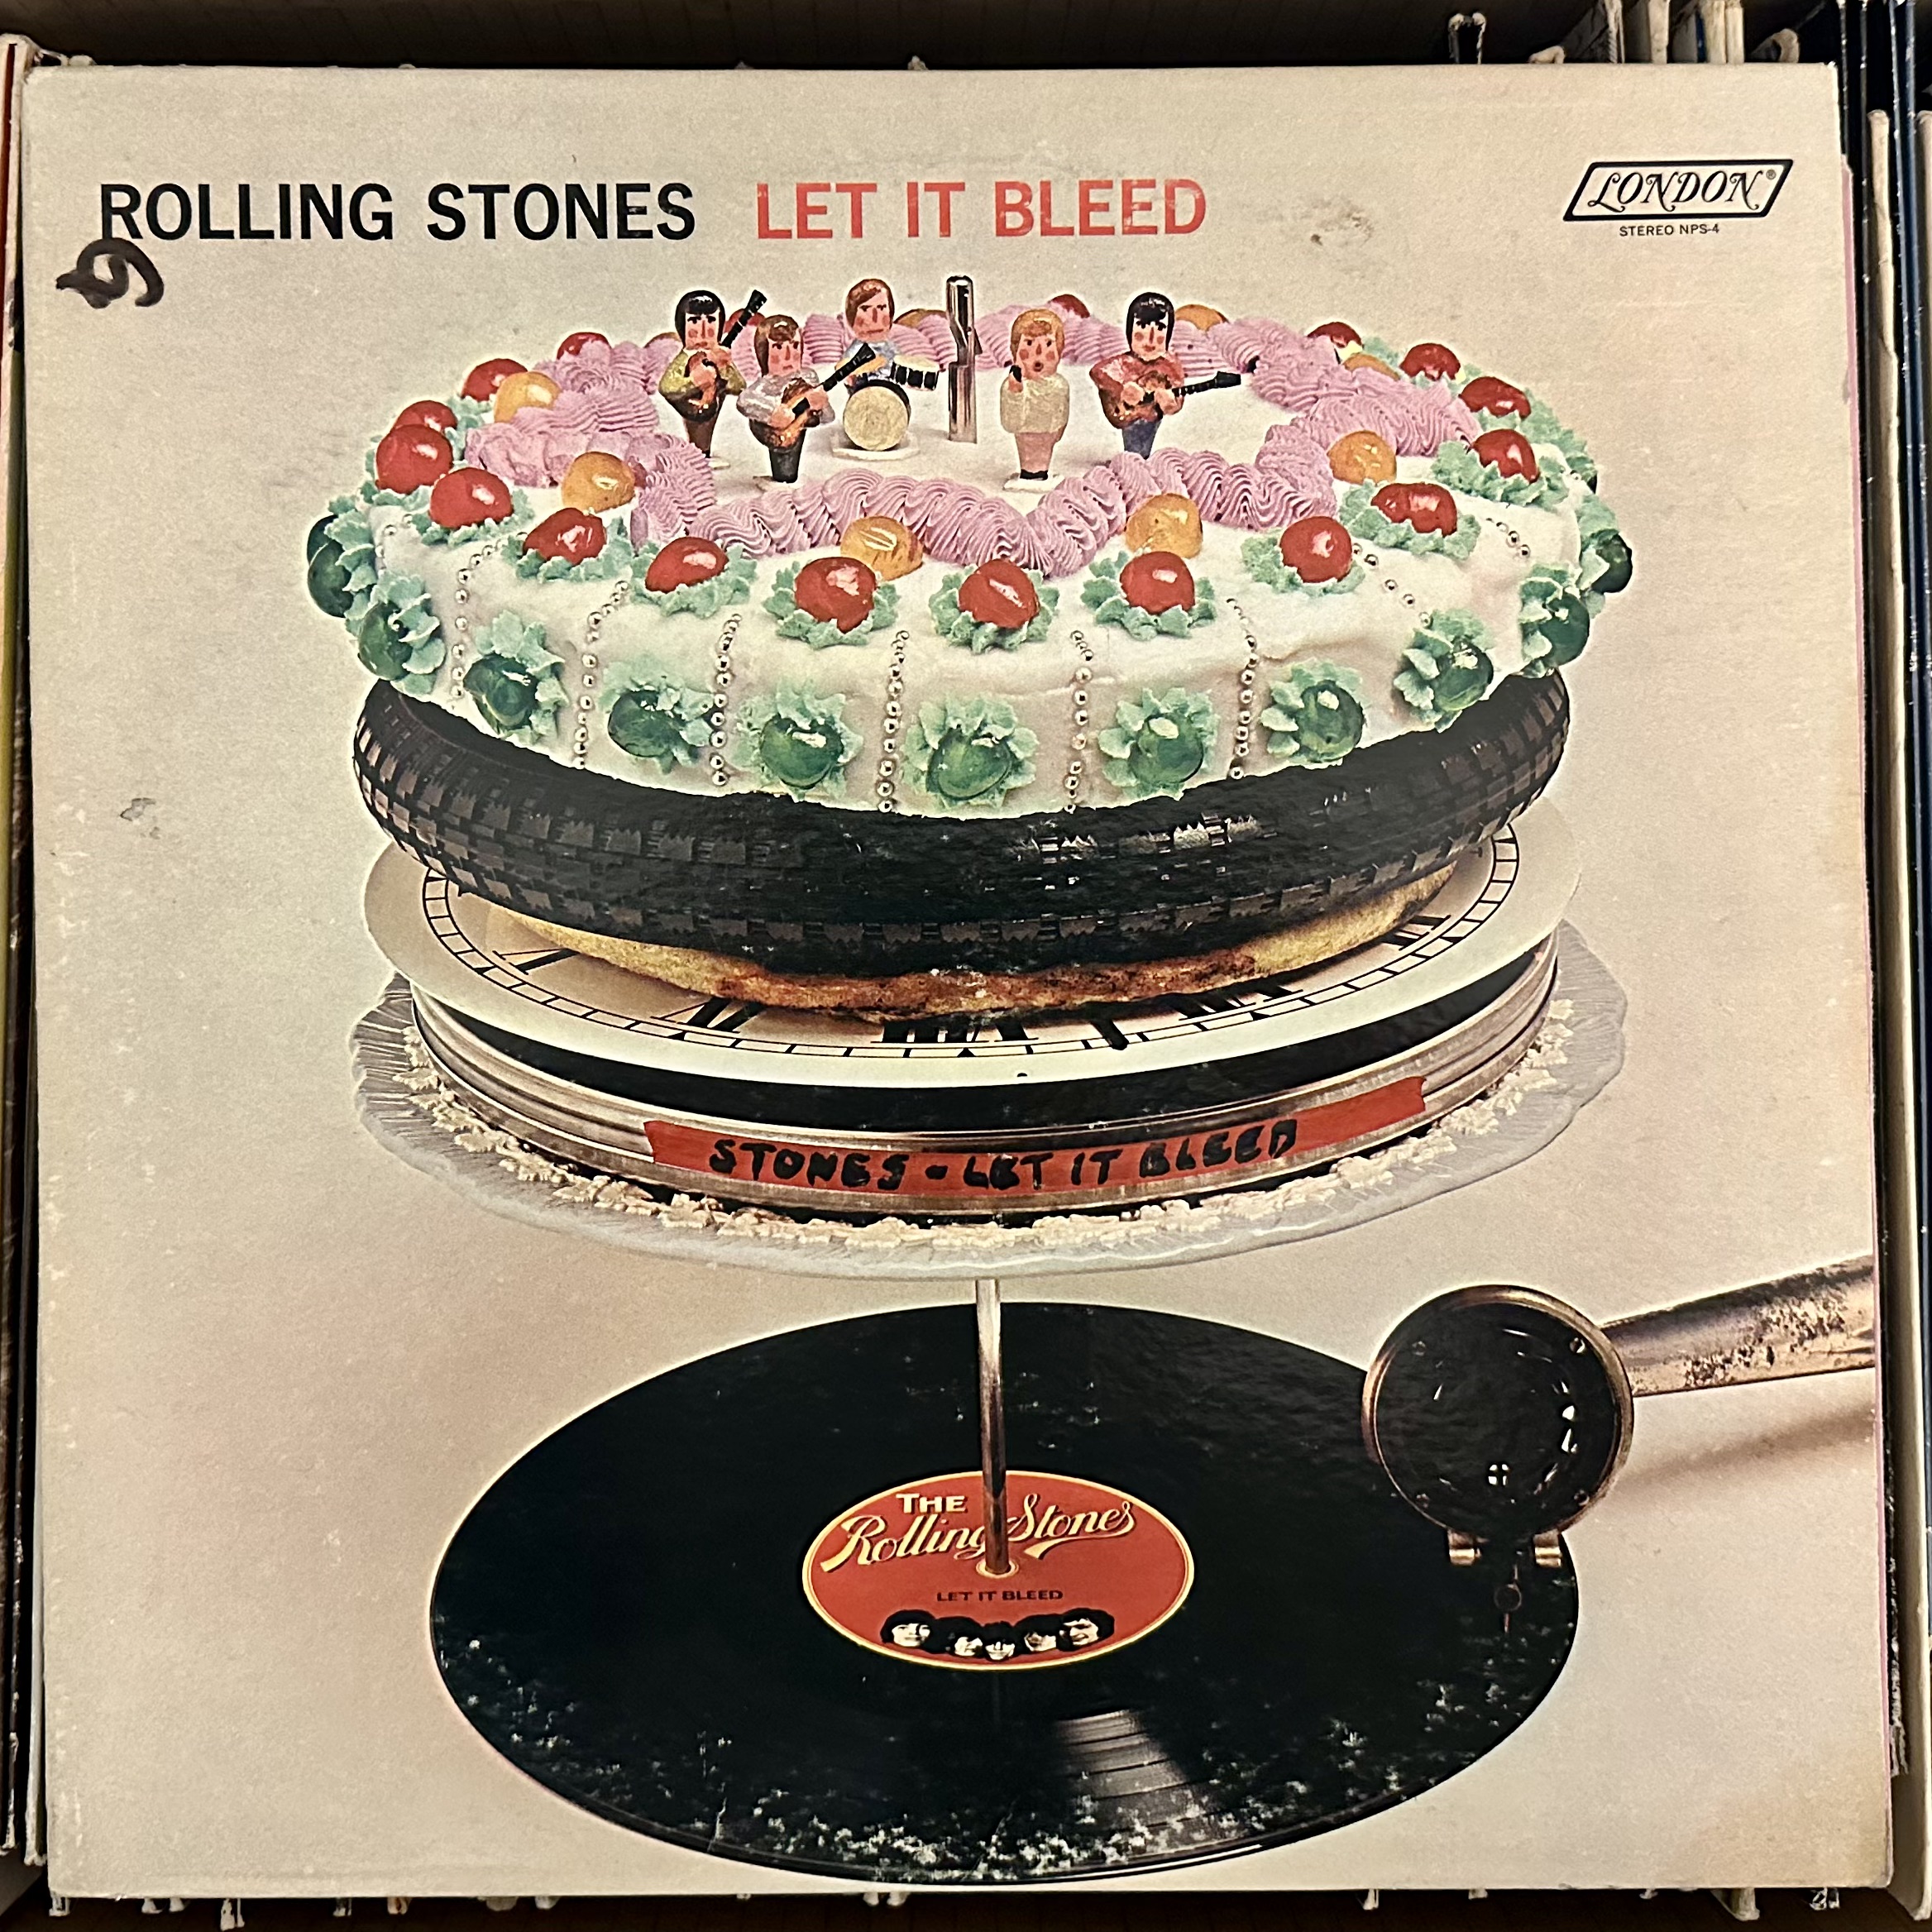 Let It Bleed by the Rolling Stones